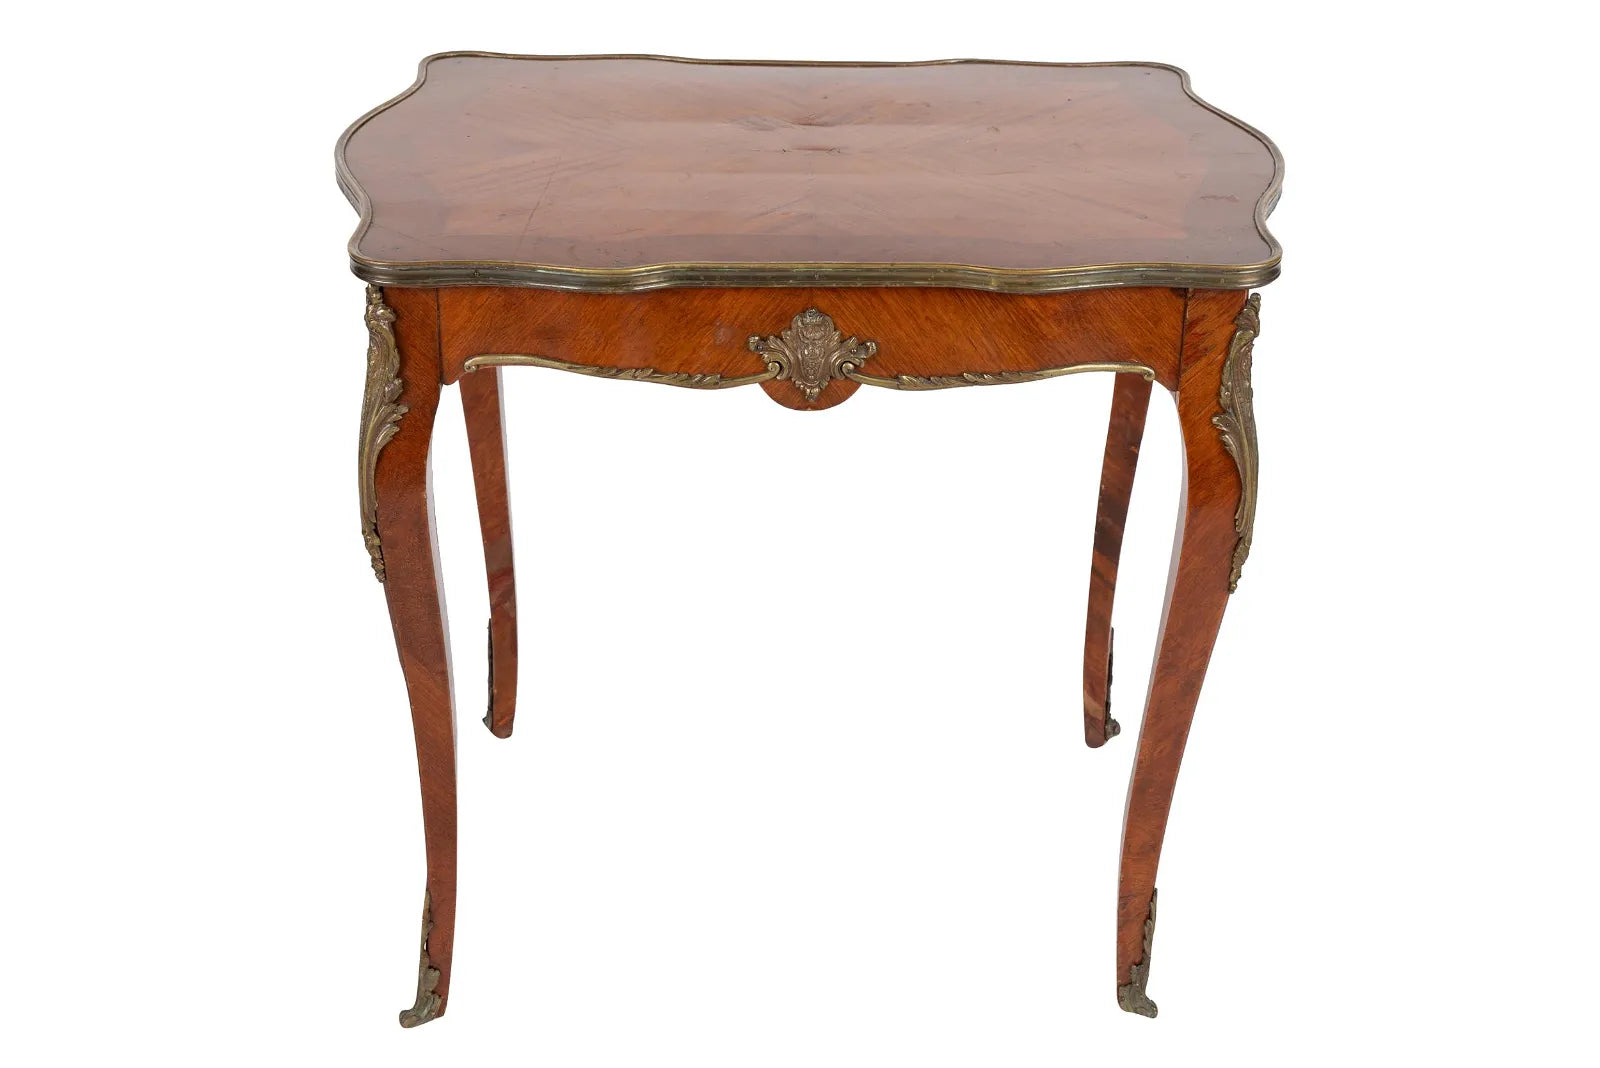 AF1-025:  ANTIQUE LATE 19TH CENTURY LOUIS XV  STYLE FRENCH KINGWOOD MARQUETRY SALON TABLE